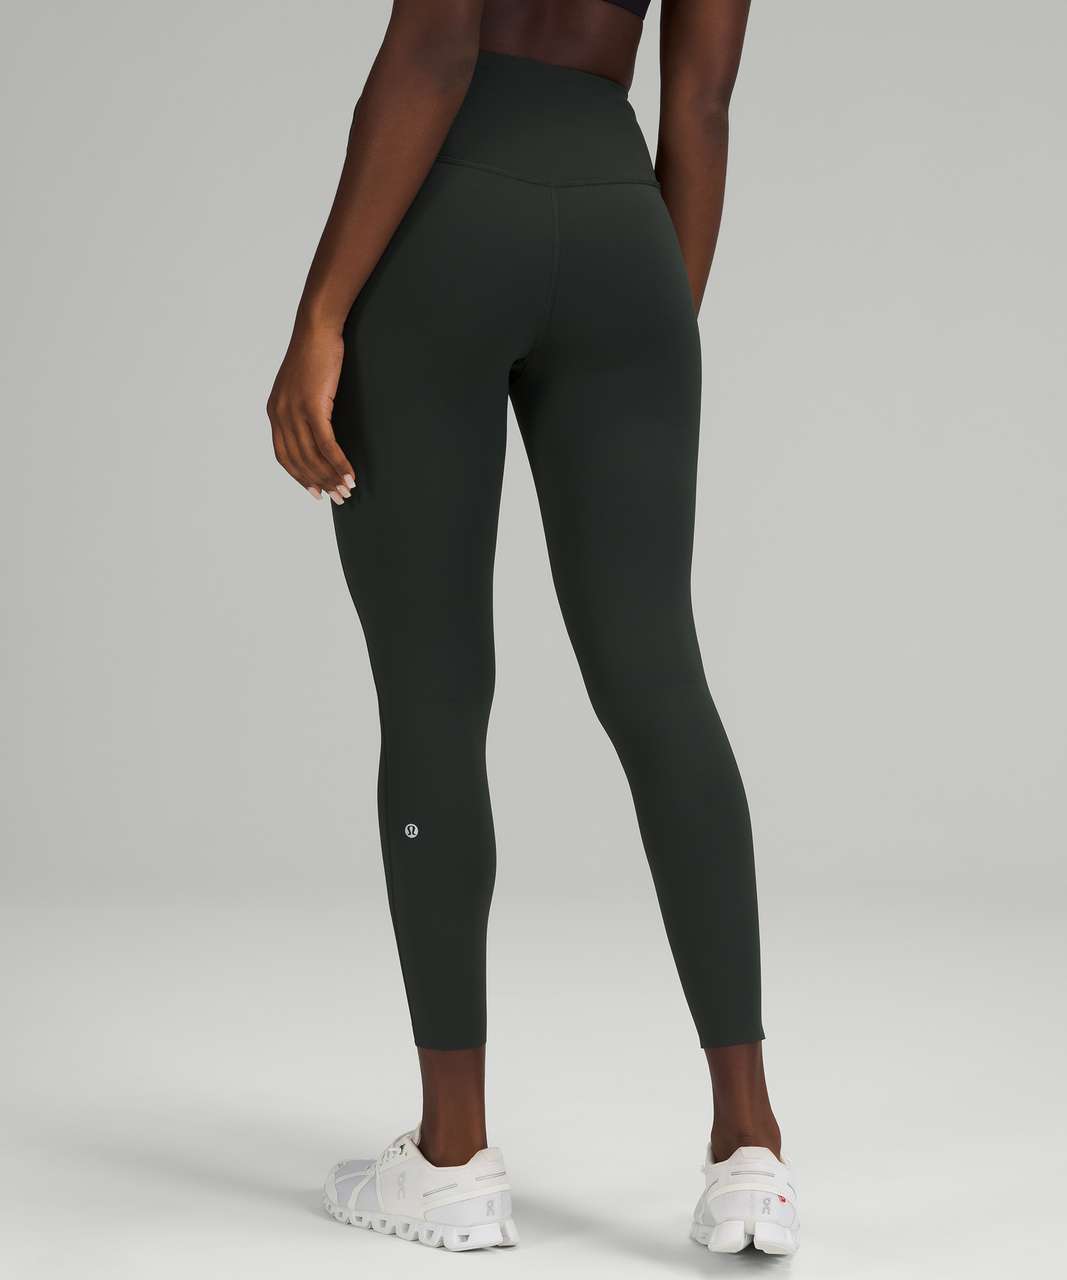 NWT lululemon Base Pace HR Tight 25* Ribbed Size10 Everglade Green